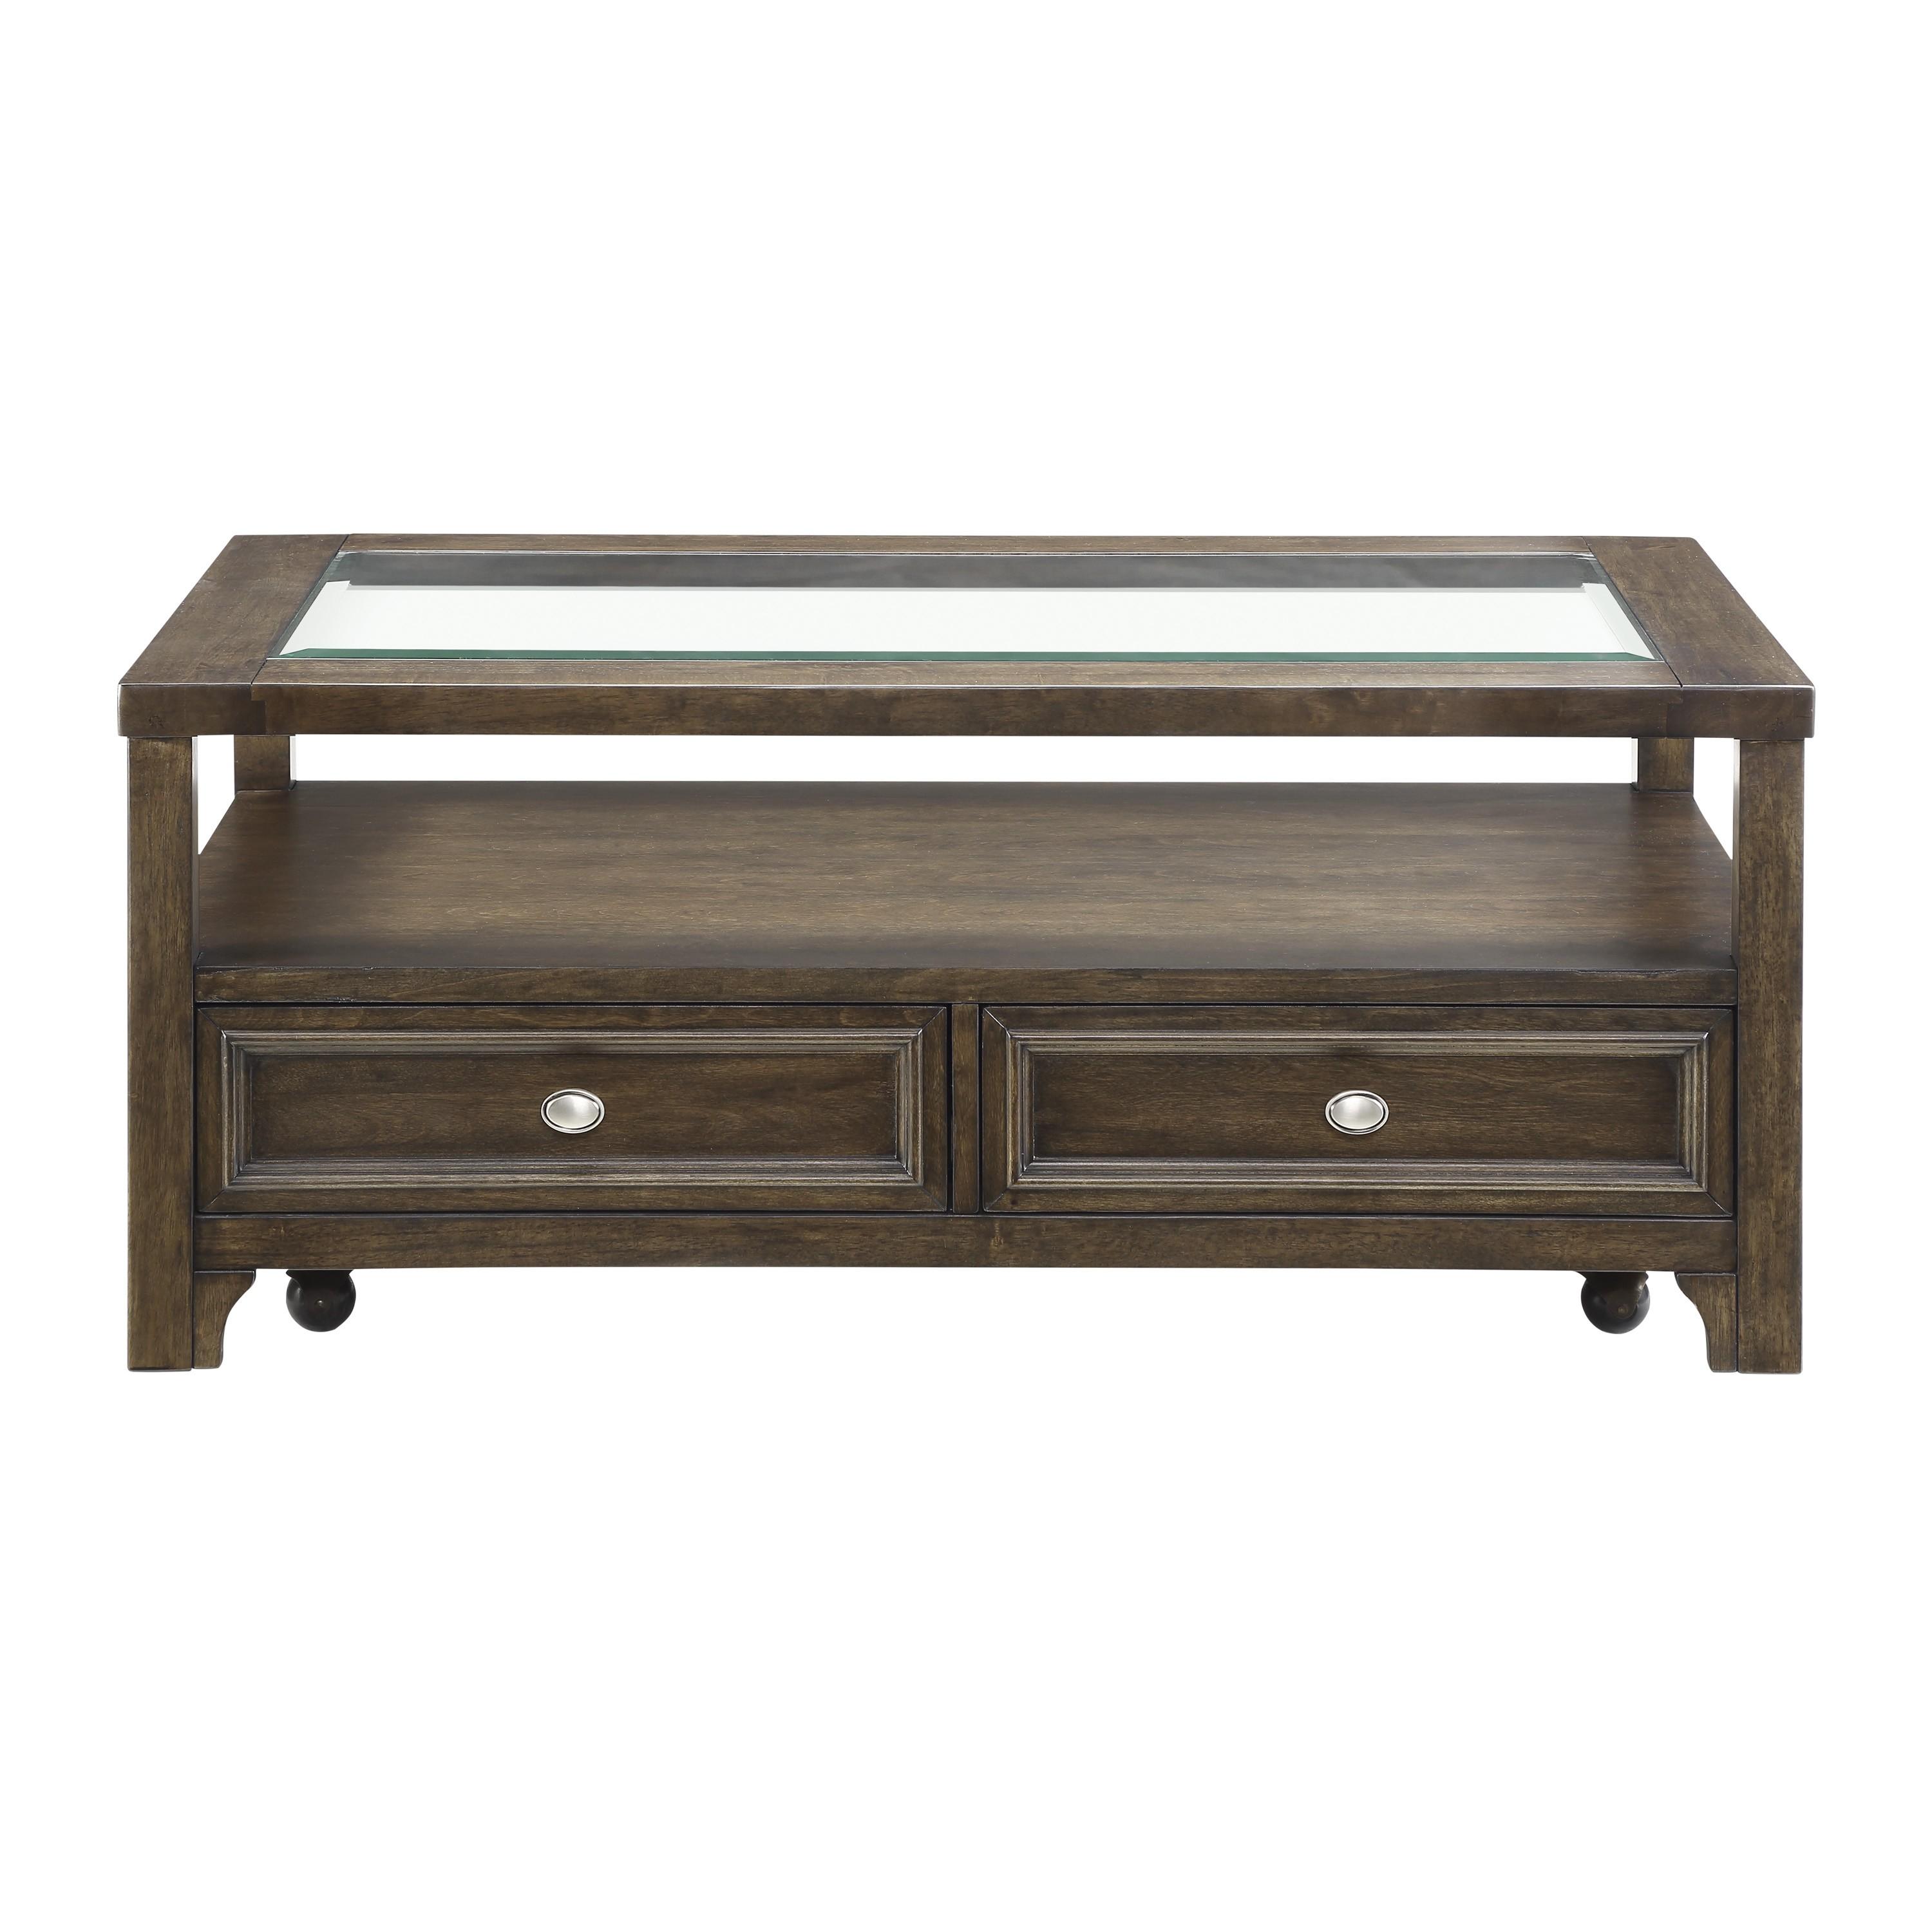 Transitional Cocktail Table 3624-30 Auburn 3624-30 in Brown 